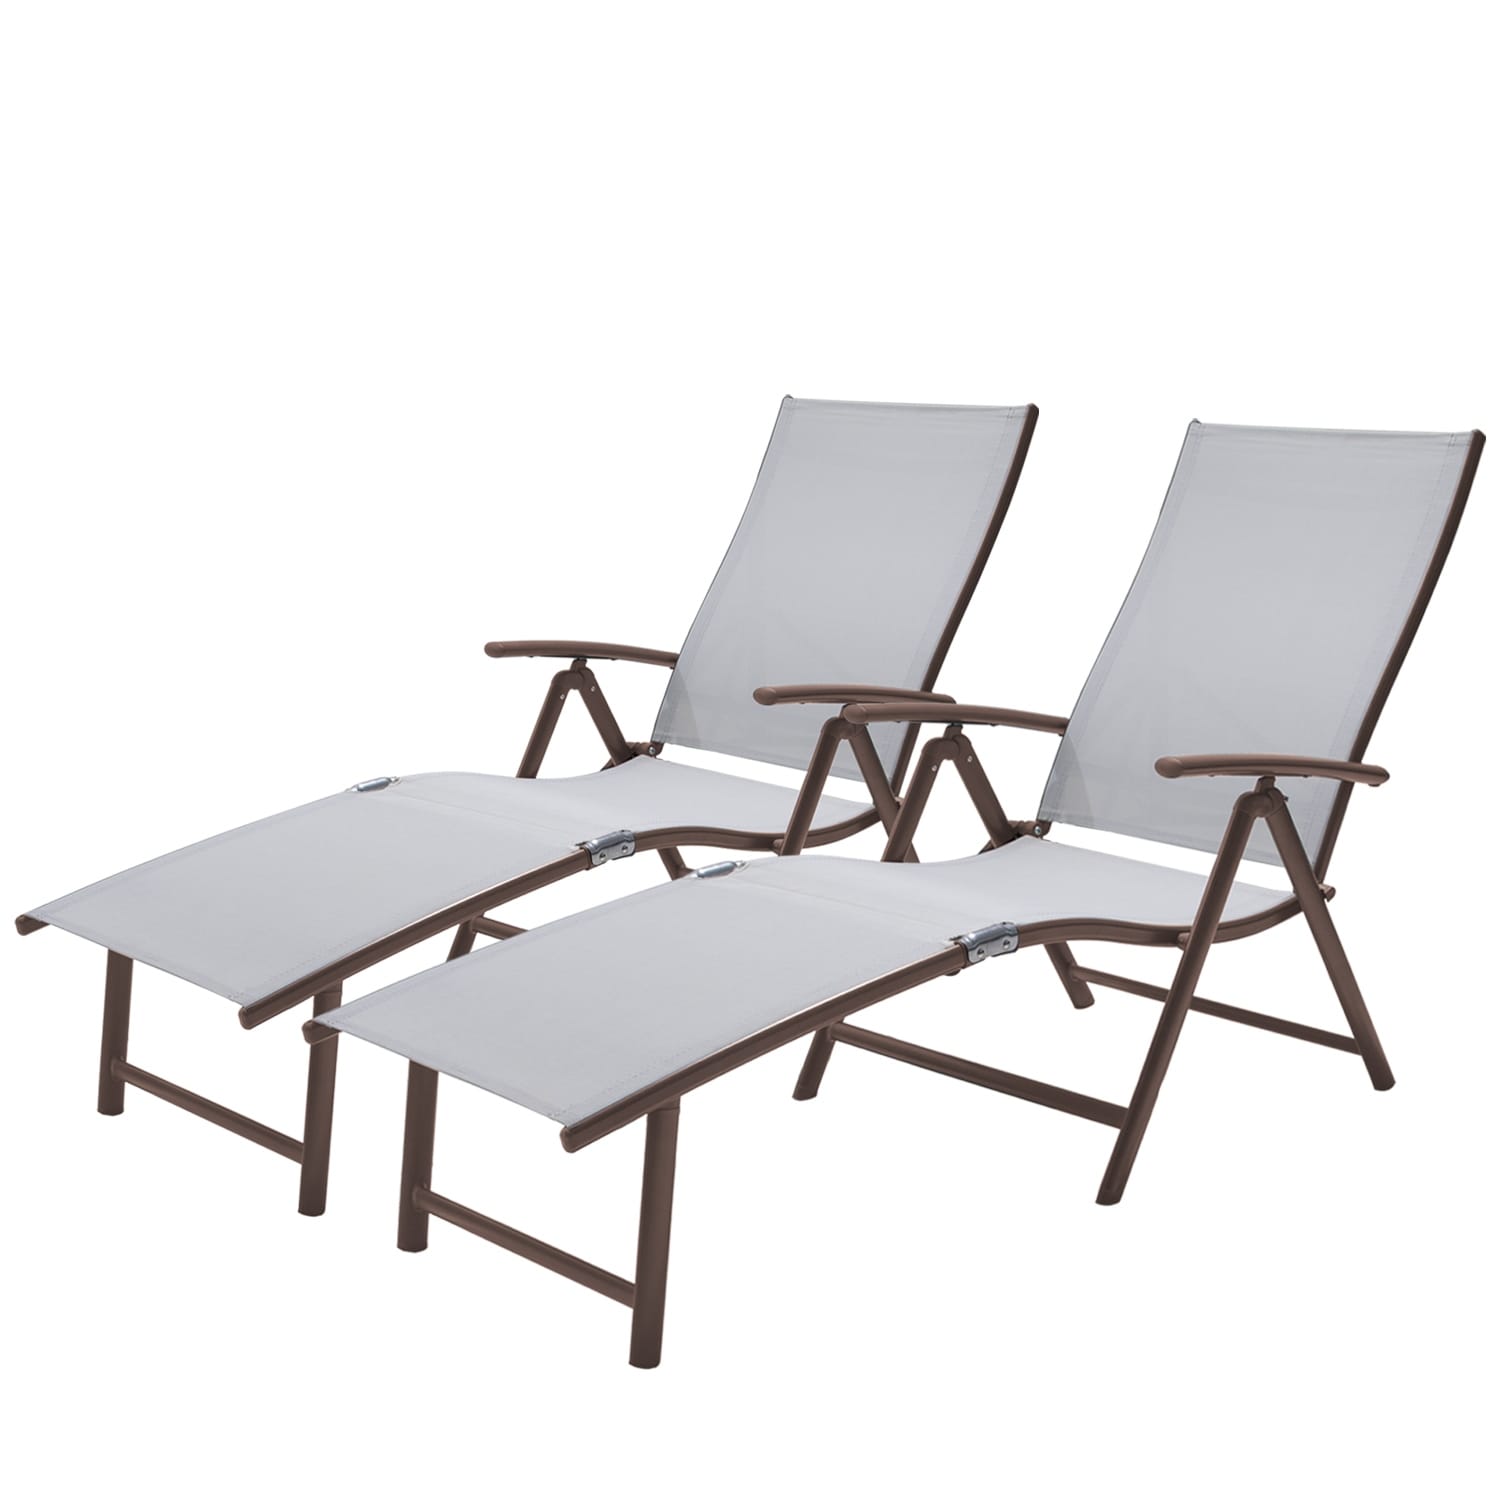 Vredhom Outdoor Portable Folding Chaise Lounge Chair (set Of 2) - 70 L X 20 W X 14 H